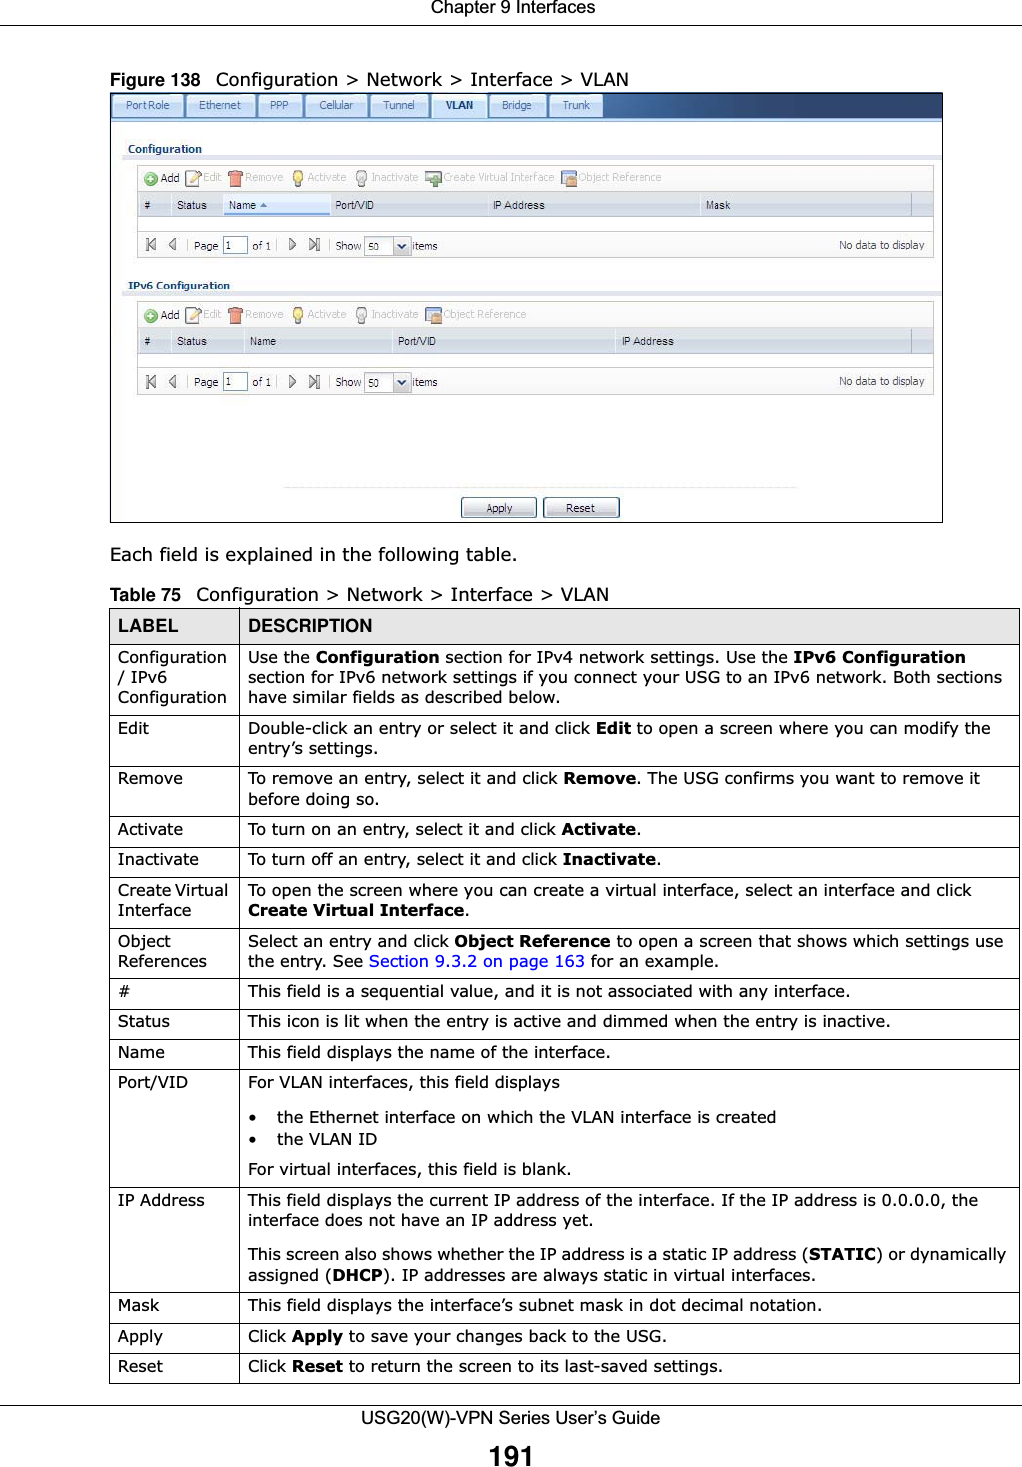  Chapter 9 InterfacesUSG20(W)-VPN Series User’s Guide191Figure 138   Configuration &gt; Network &gt; Interface &gt; VLAN   Each field is explained in the following table.  Table 75   Configuration &gt; Network &gt; Interface &gt; VLANLABEL DESCRIPTIONConfiguration / IPv6 ConfigurationUse the Configuration section for IPv4 network settings. Use the IPv6 Configuration section for IPv6 network settings if you connect your USG to an IPv6 network. Both sections have similar fields as described below.Edit Double-click an entry or select it and click Edit to open a screen where you can modify the entry’s settings. Remove To remove an entry, select it and click Remove. The USG confirms you want to remove it before doing so.Activate To turn on an entry, select it and click Activate.Inactivate To turn off an entry, select it and click Inactivate.Create Virtual InterfaceTo open the screen where you can create a virtual interface, select an interface and click Create Virtual Interface.Object ReferencesSelect an entry and click Object Reference to open a screen that shows which settings use the entry. See Section 9.3.2 on page 163 for an example.#This field is a sequential value, and it is not associated with any interface.Status This icon is lit when the entry is active and dimmed when the entry is inactive.Name This field displays the name of the interface.Port/VID For VLAN interfaces, this field displays• the Ethernet interface on which the VLAN interface is created• the VLAN IDFor virtual interfaces, this field is blank.IP Address This field displays the current IP address of the interface. If the IP address is 0.0.0.0, the interface does not have an IP address yet.This screen also shows whether the IP address is a static IP address (STATIC) or dynamically assigned (DHCP). IP addresses are always static in virtual interfaces.Mask This field displays the interface’s subnet mask in dot decimal notation.Apply Click Apply to save your changes back to the USG.Reset Click Reset to return the screen to its last-saved settings. 